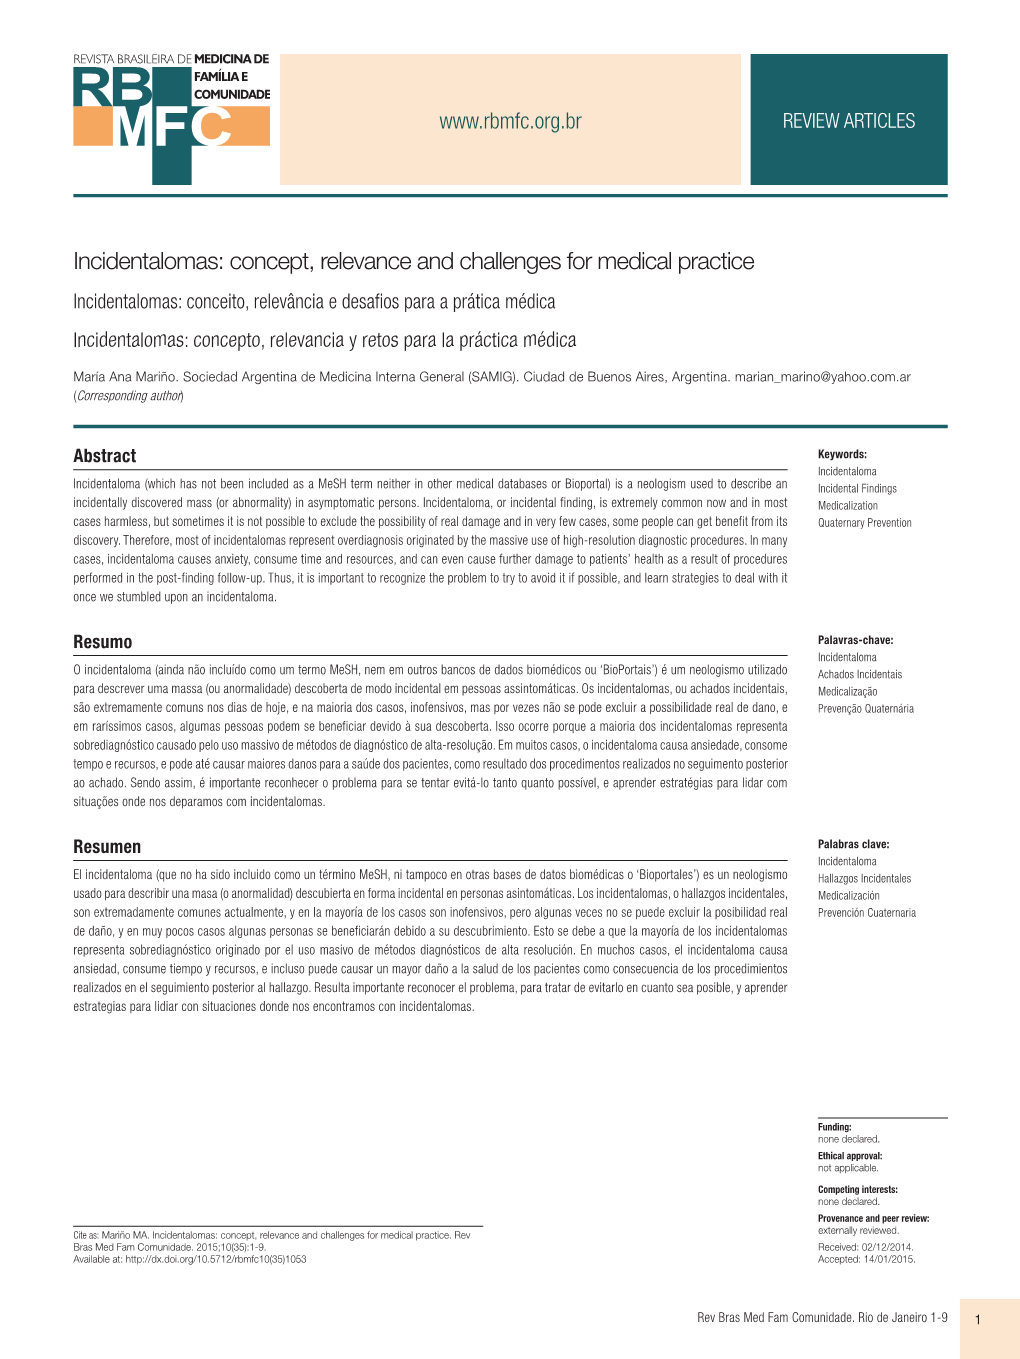 Incidentalomas: Concept, Relevance and Challenges for Medical Practice